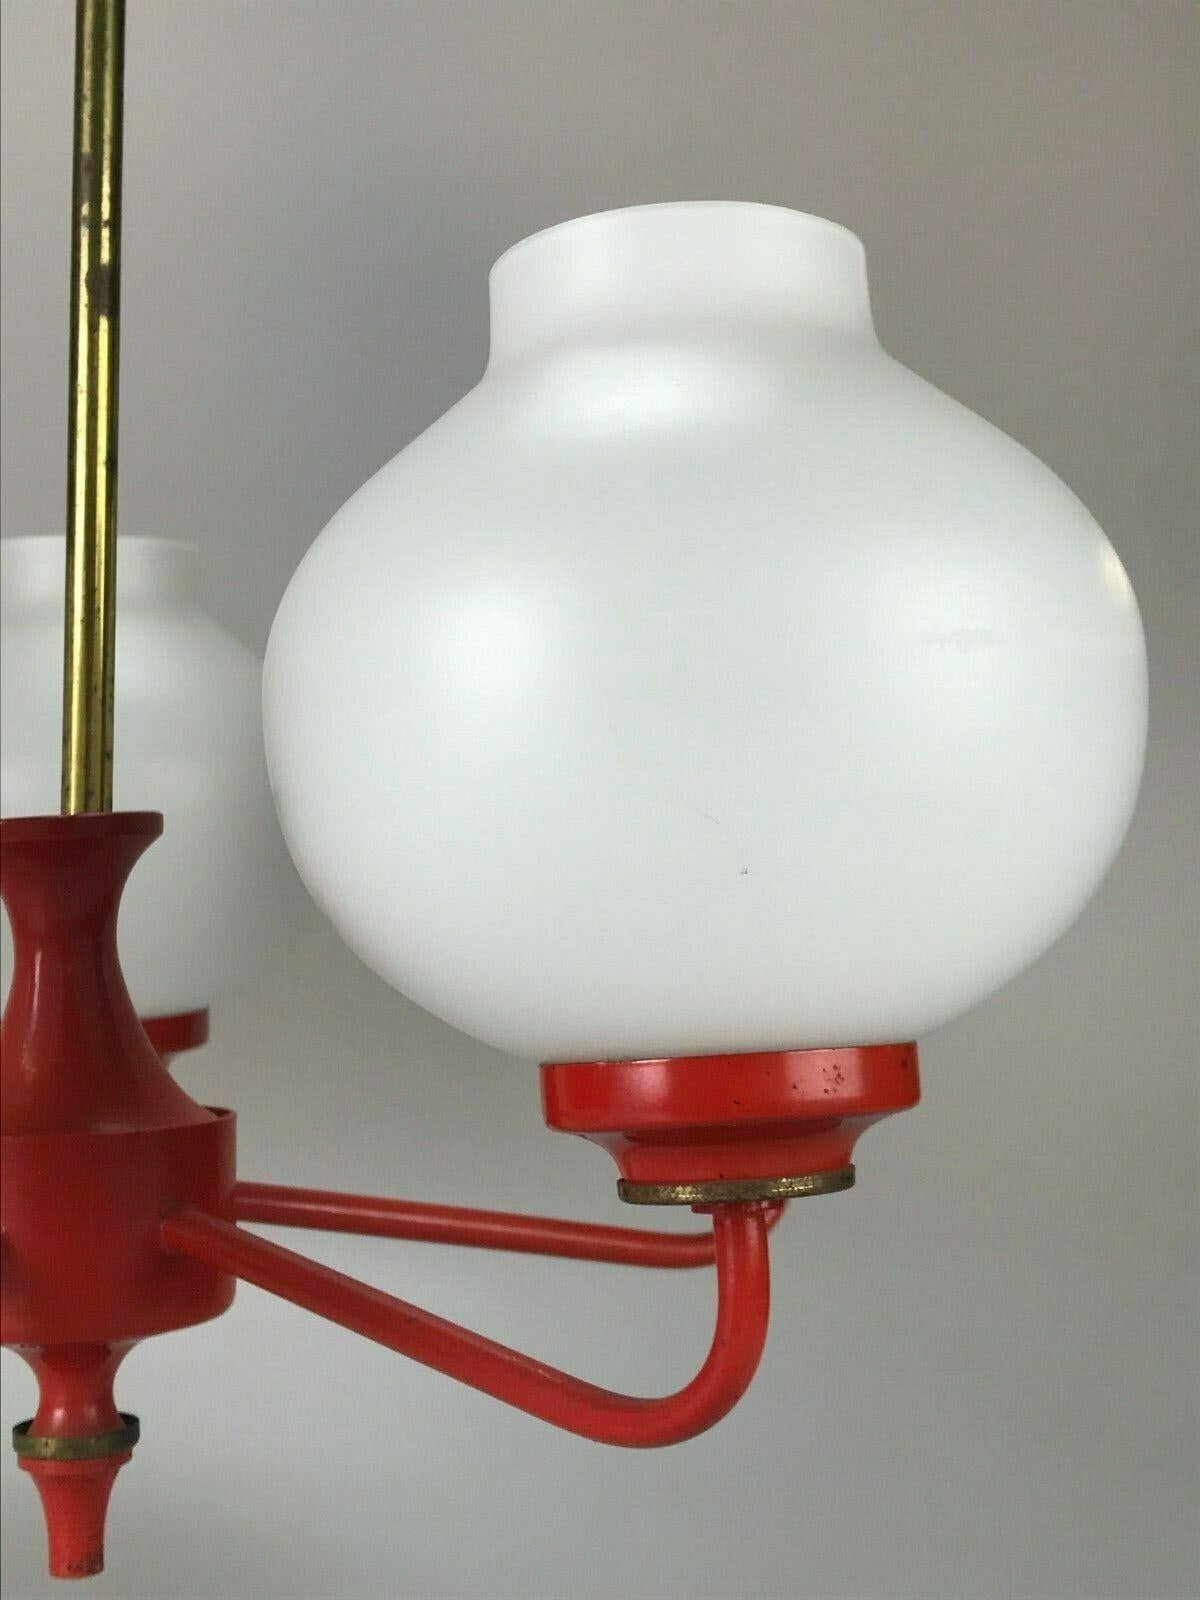 70s Lamp Light Ceiling Lamp Chandelier Ball Lamp Space Age Design For Sale 2